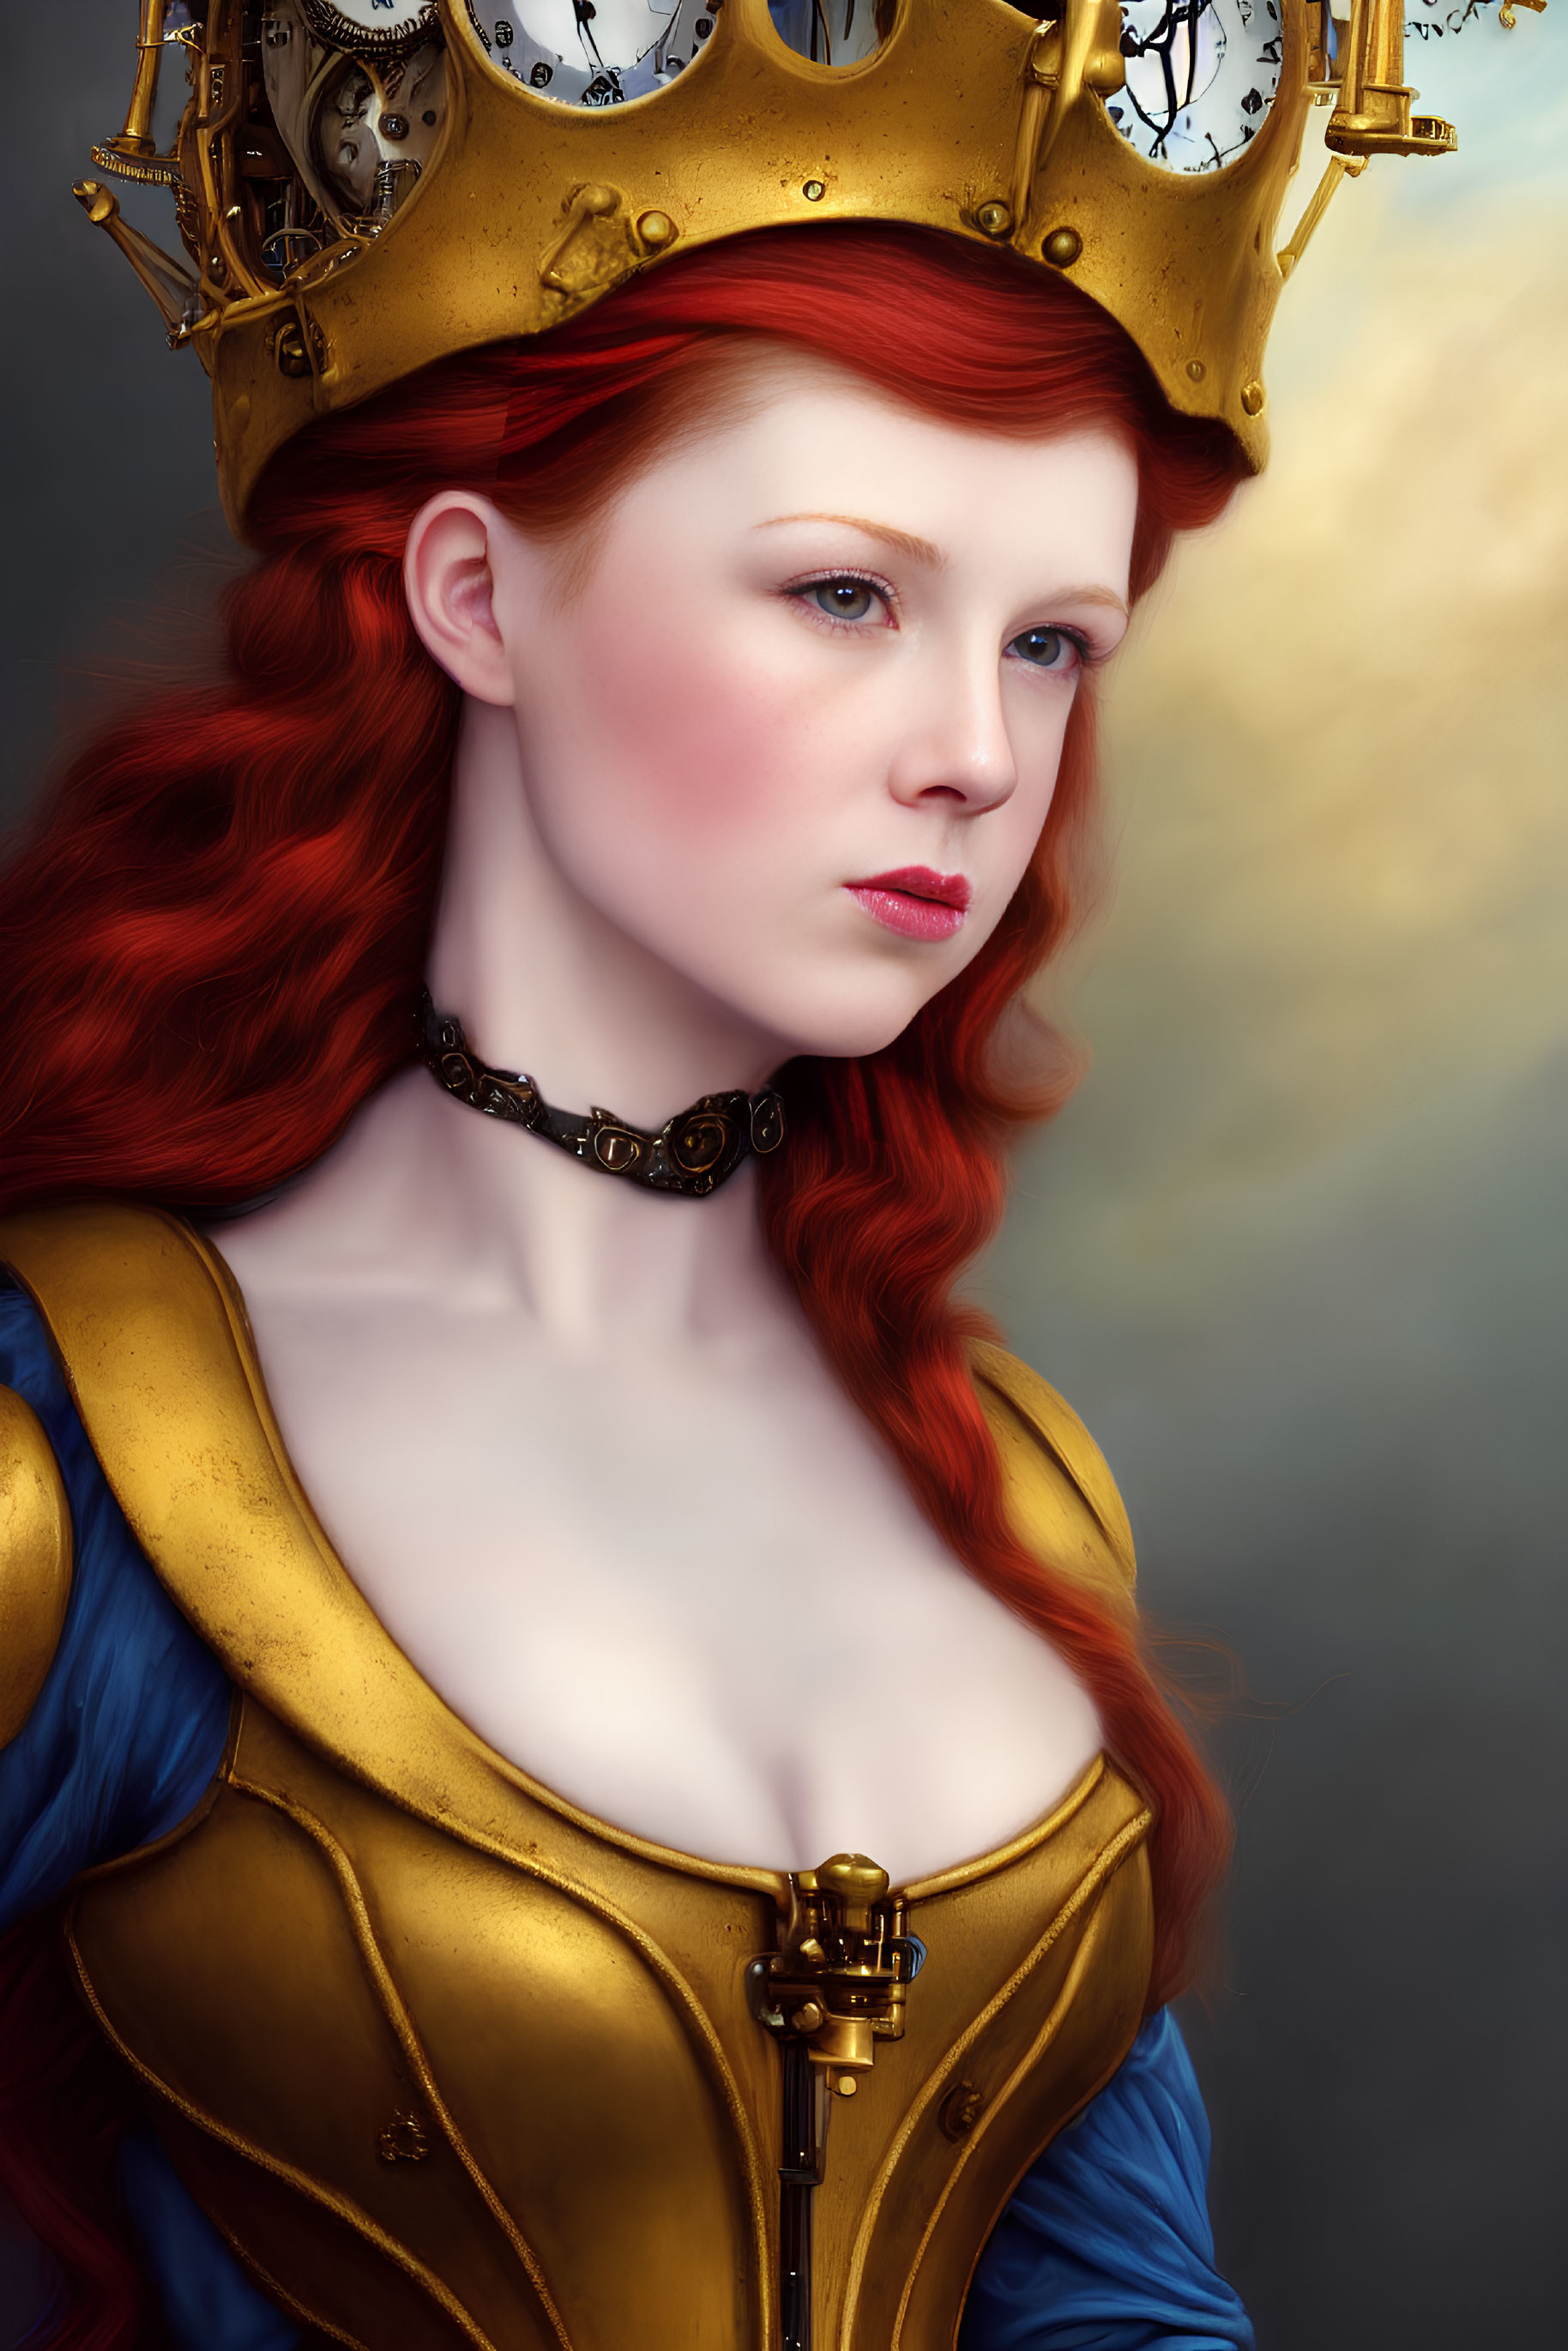 Regal woman with long red hair in golden crown and medieval dress